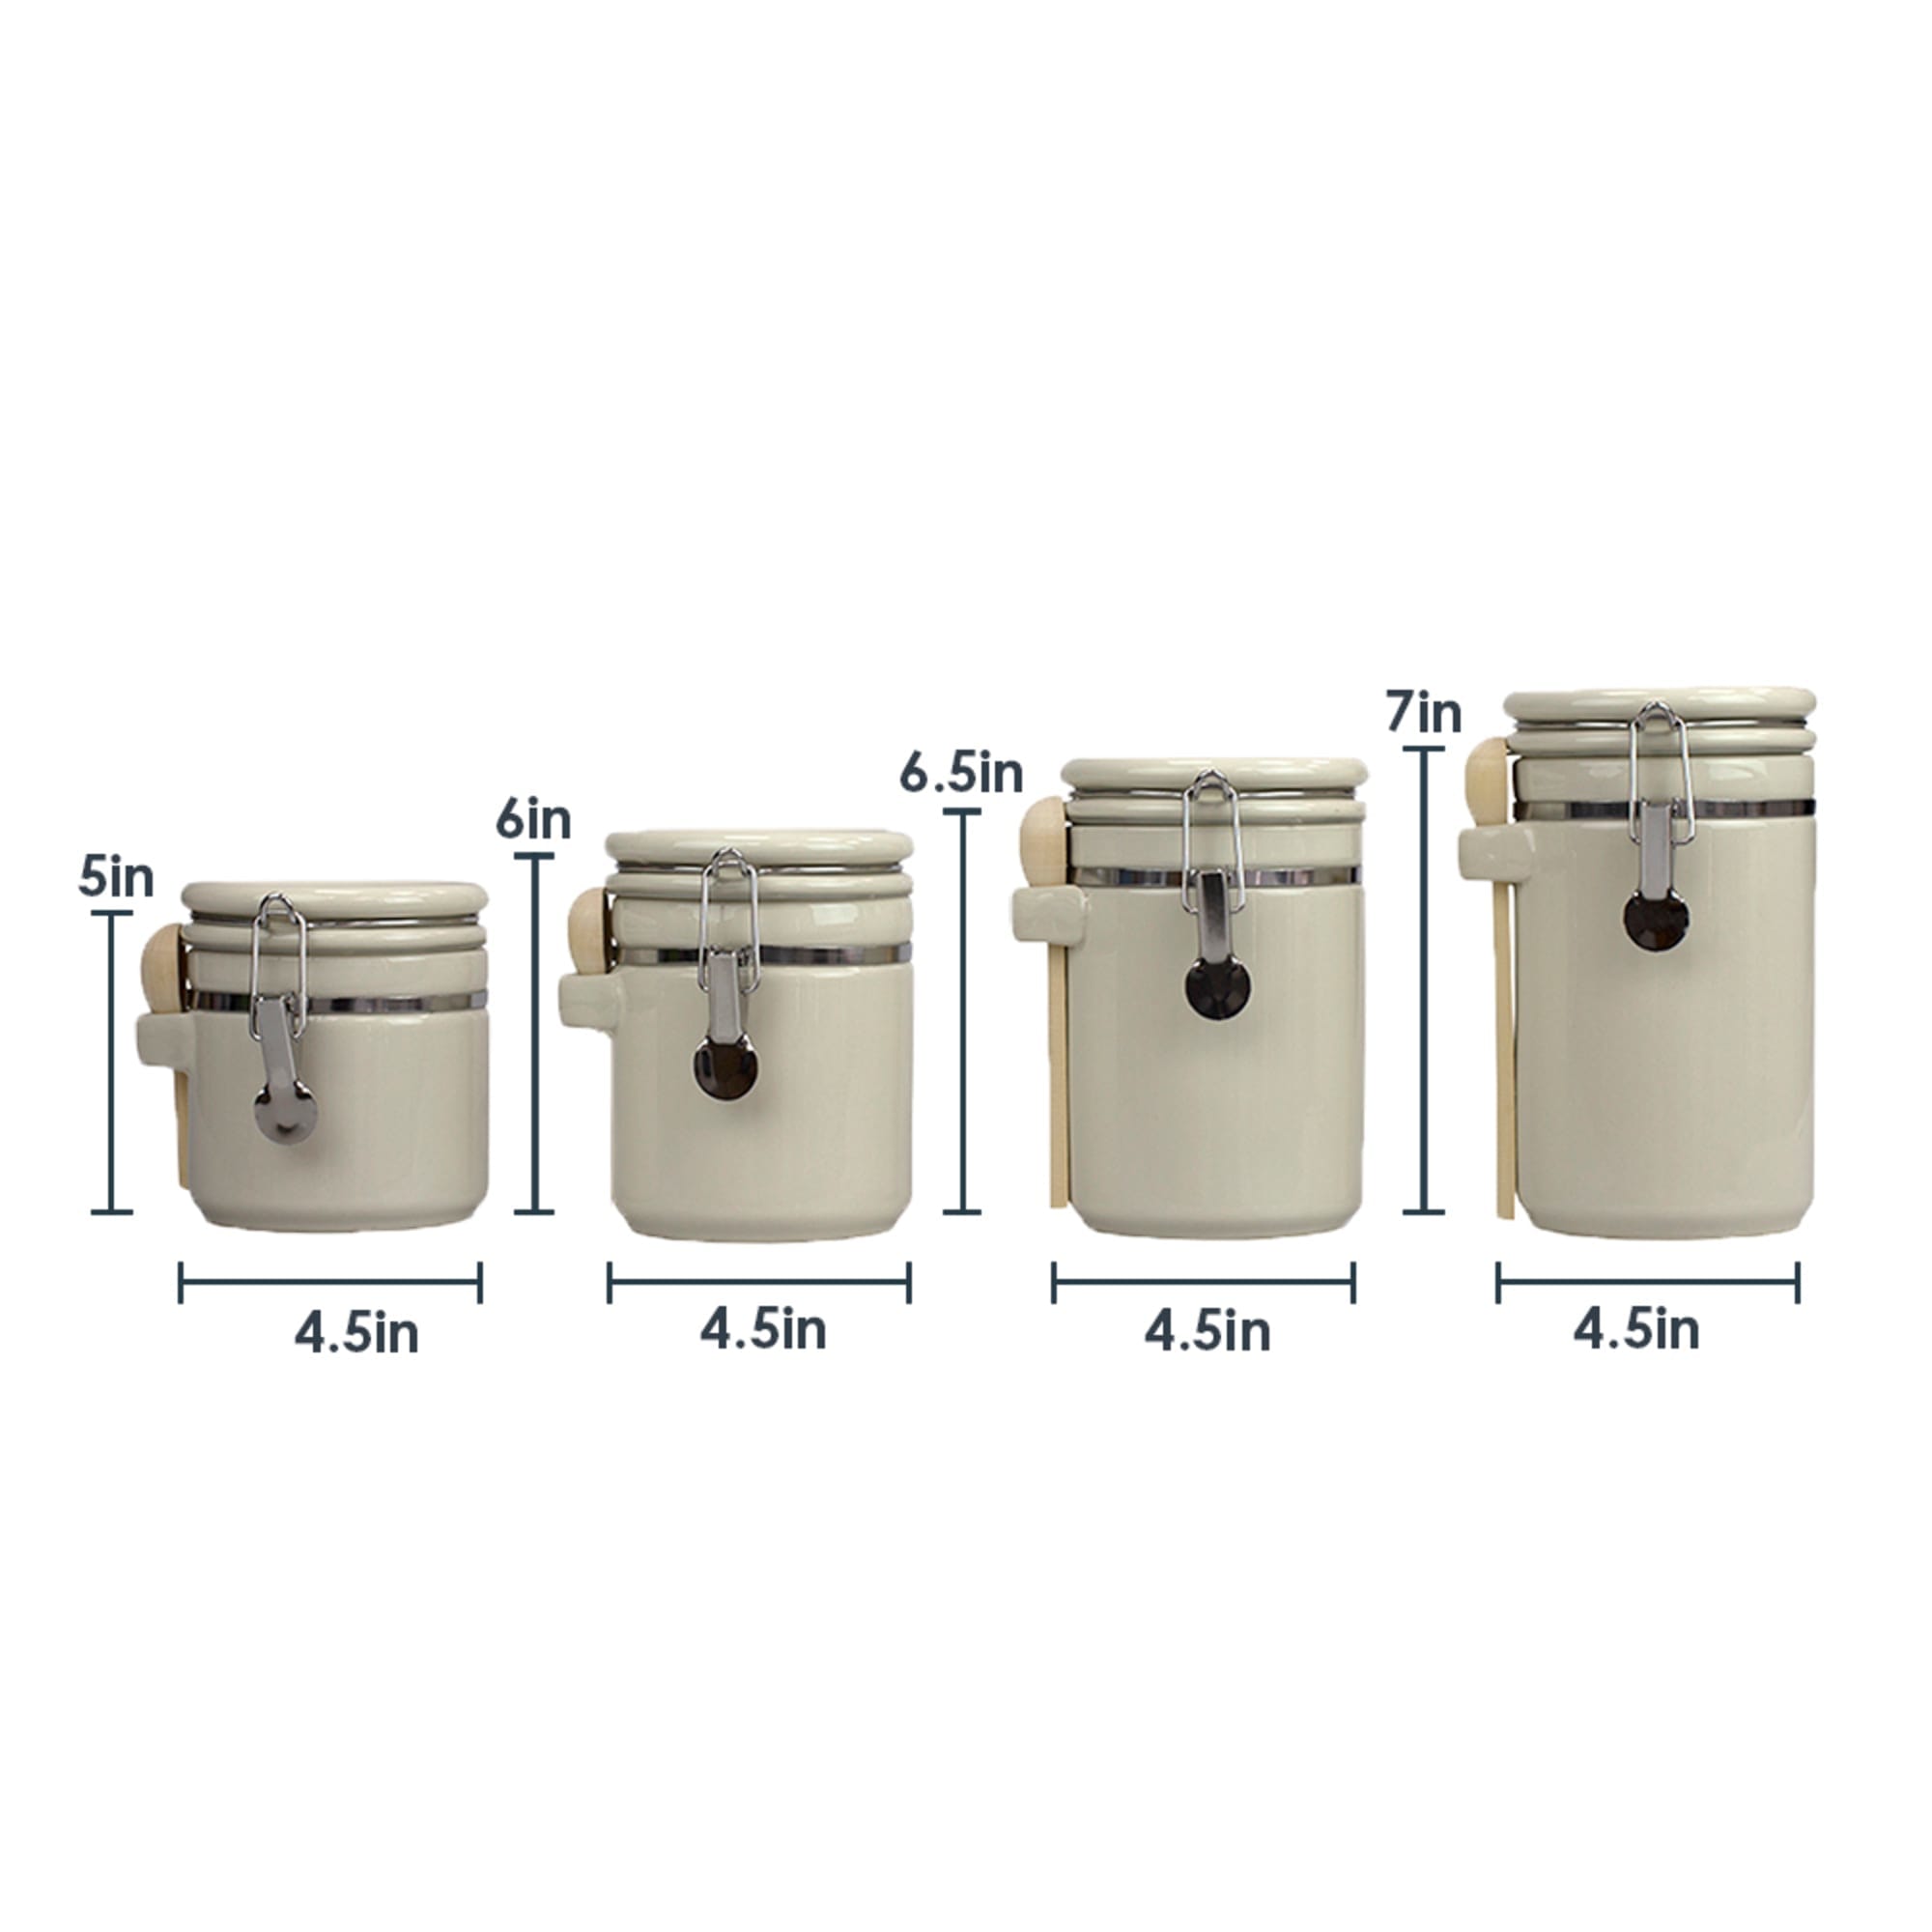 Home Basics 4 Piece Ceramic Canisters with Easy Open Air-Tight Clamp Top Lid and Wooden Spoons, Beige $20.00 EACH, CASE PACK OF 2